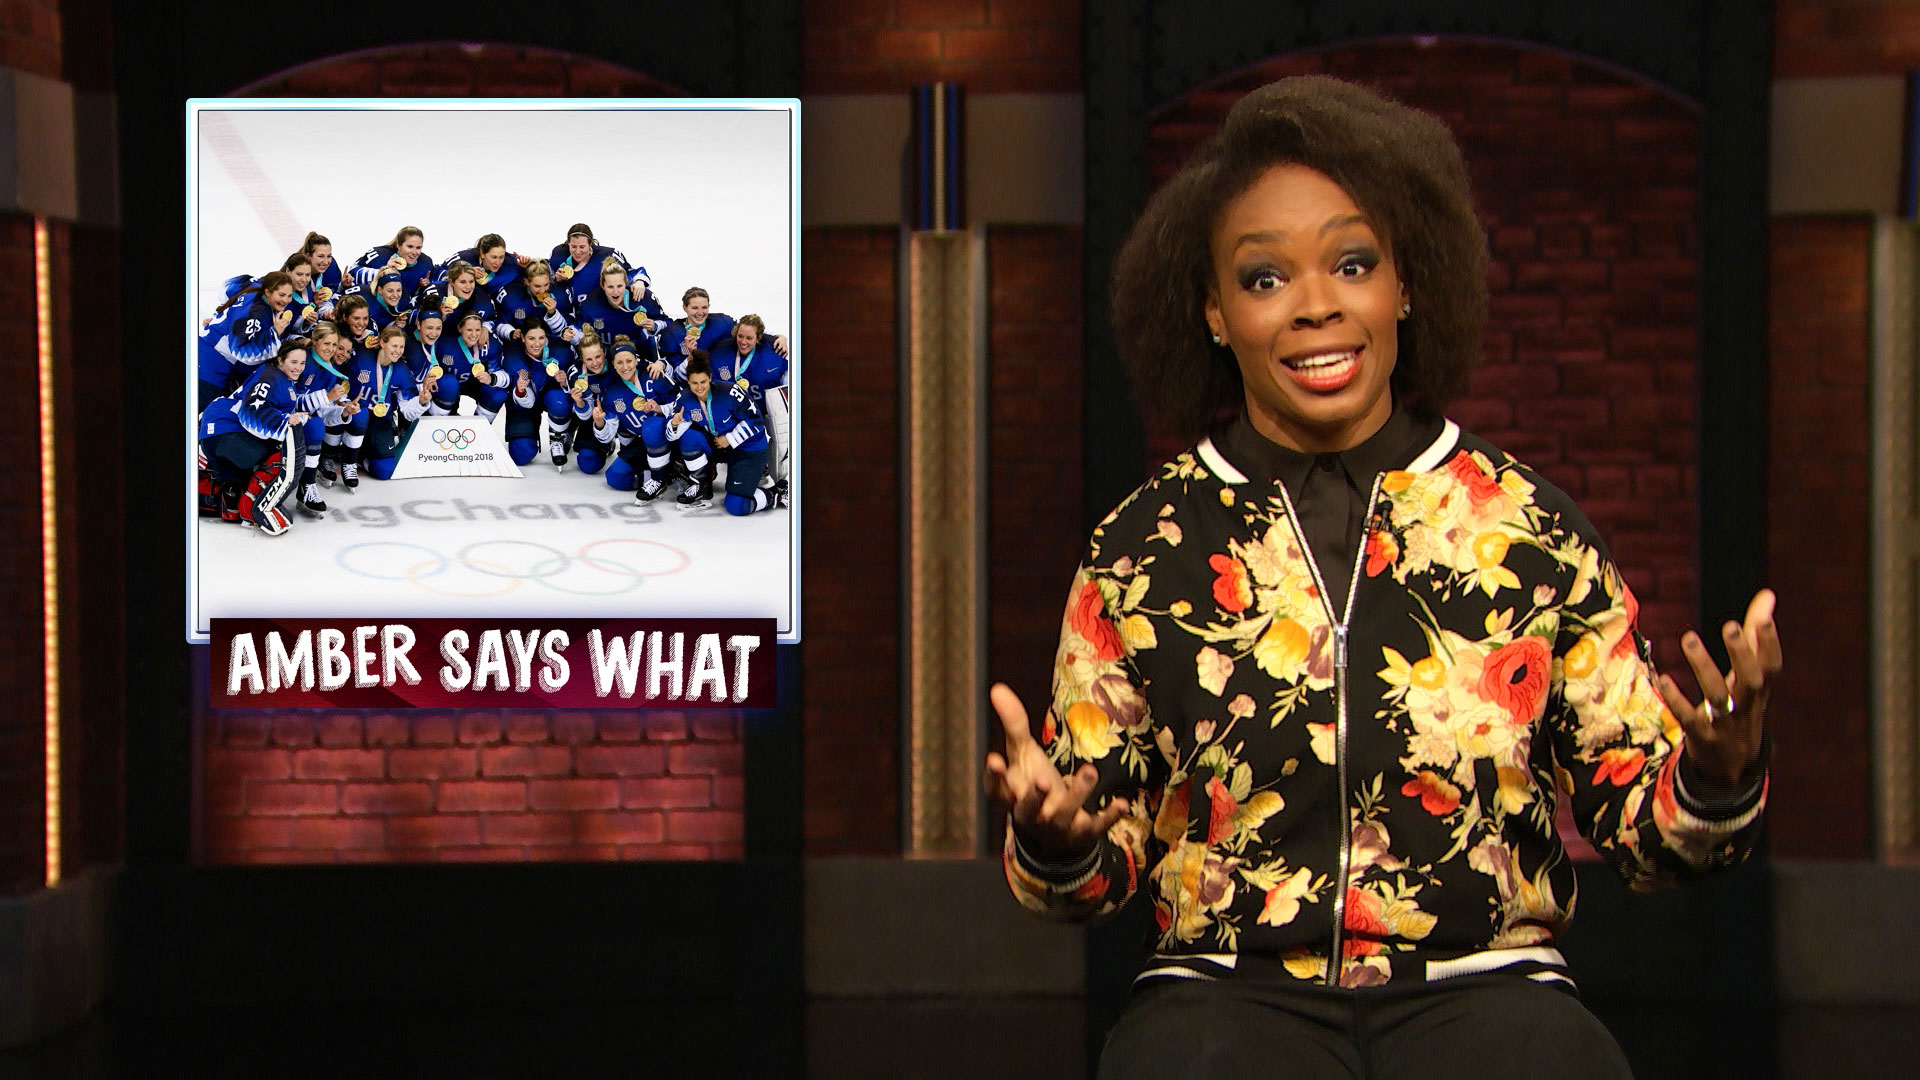 Watch Late Night with Seth Meyers Highlight Amber Says What The Winter Olympics